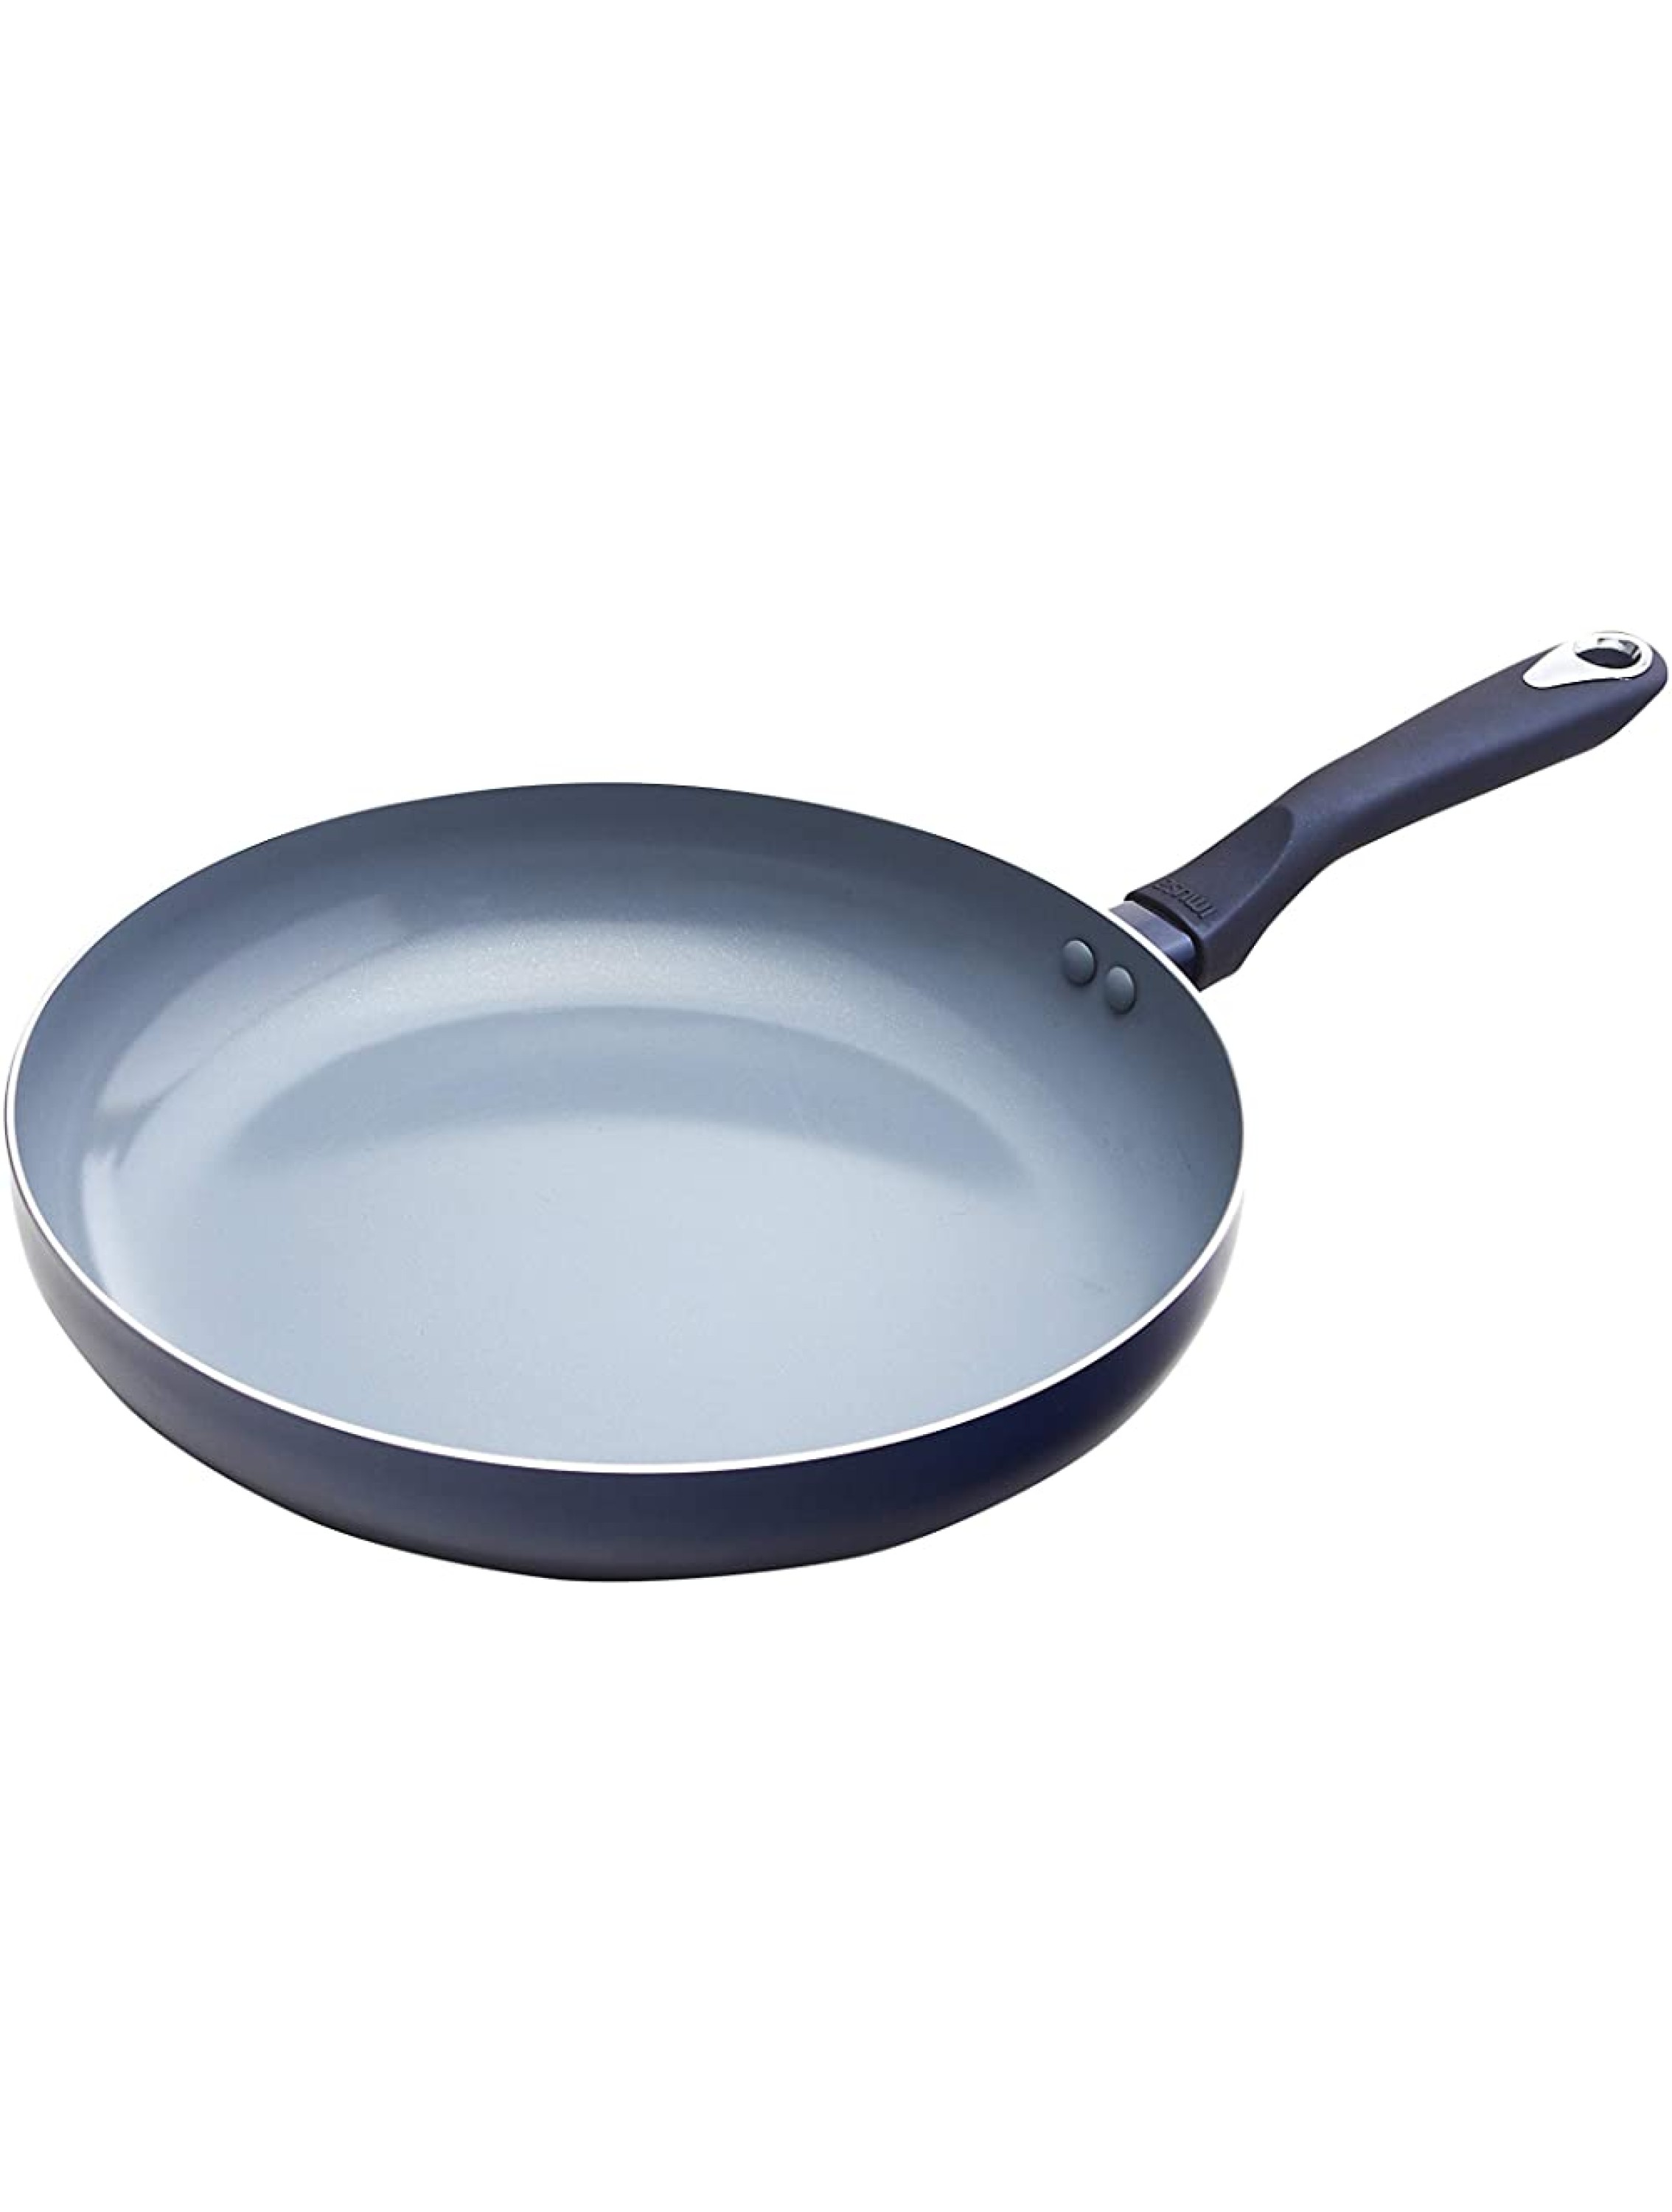 IMUSA USA Blue Ceramic Fry Pan with Soft Touch Handle 12 Inch 12 - BNIQ6M4Z6